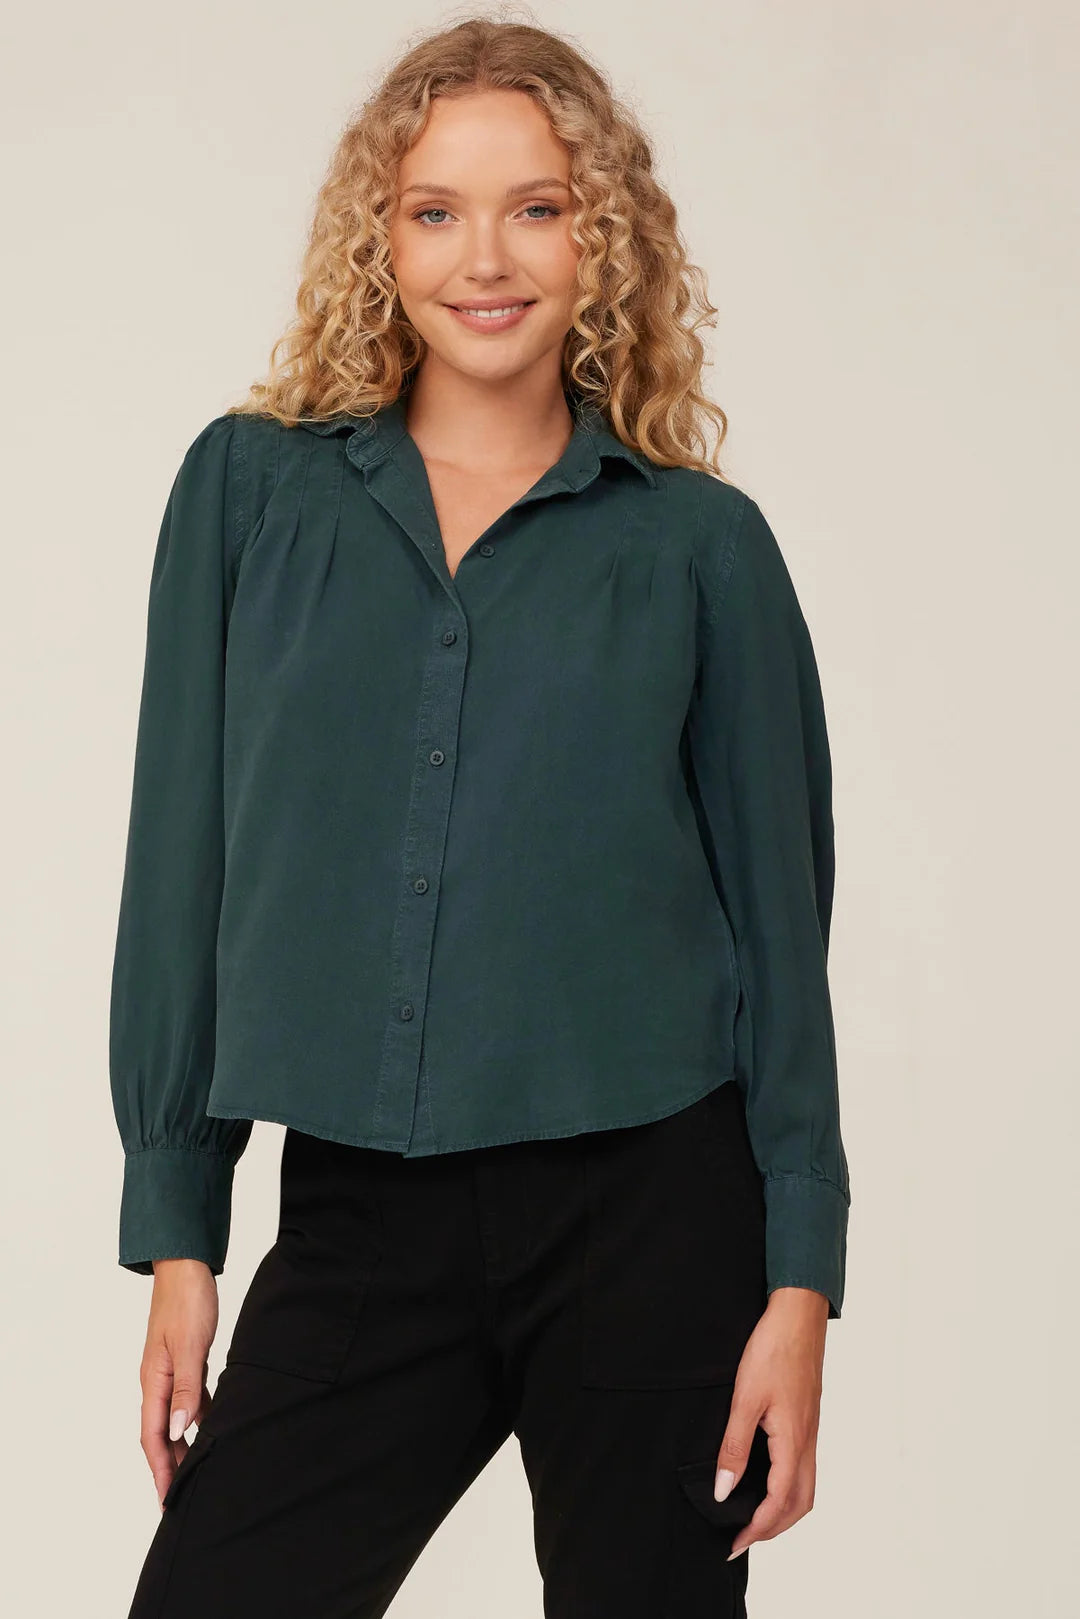 Pin Tucked Button Down in Jade Night